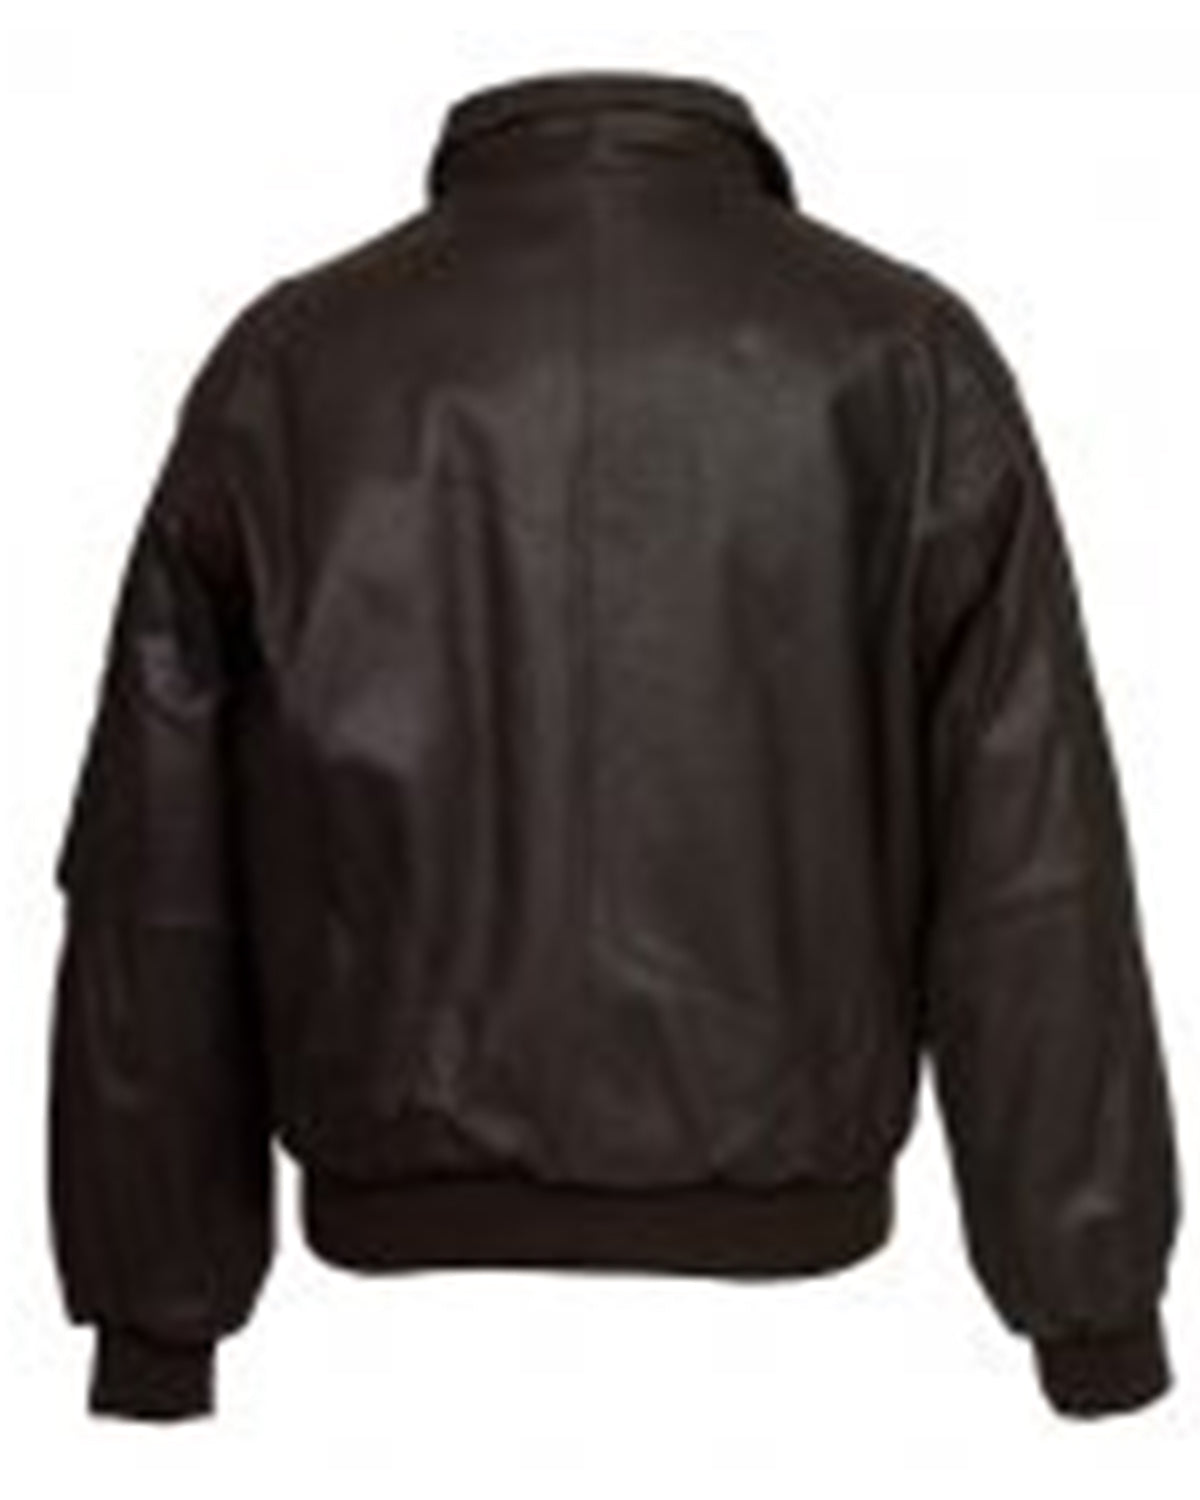 MotorCycleJackets Mens A-2 Brown Leather Bomber Jacket